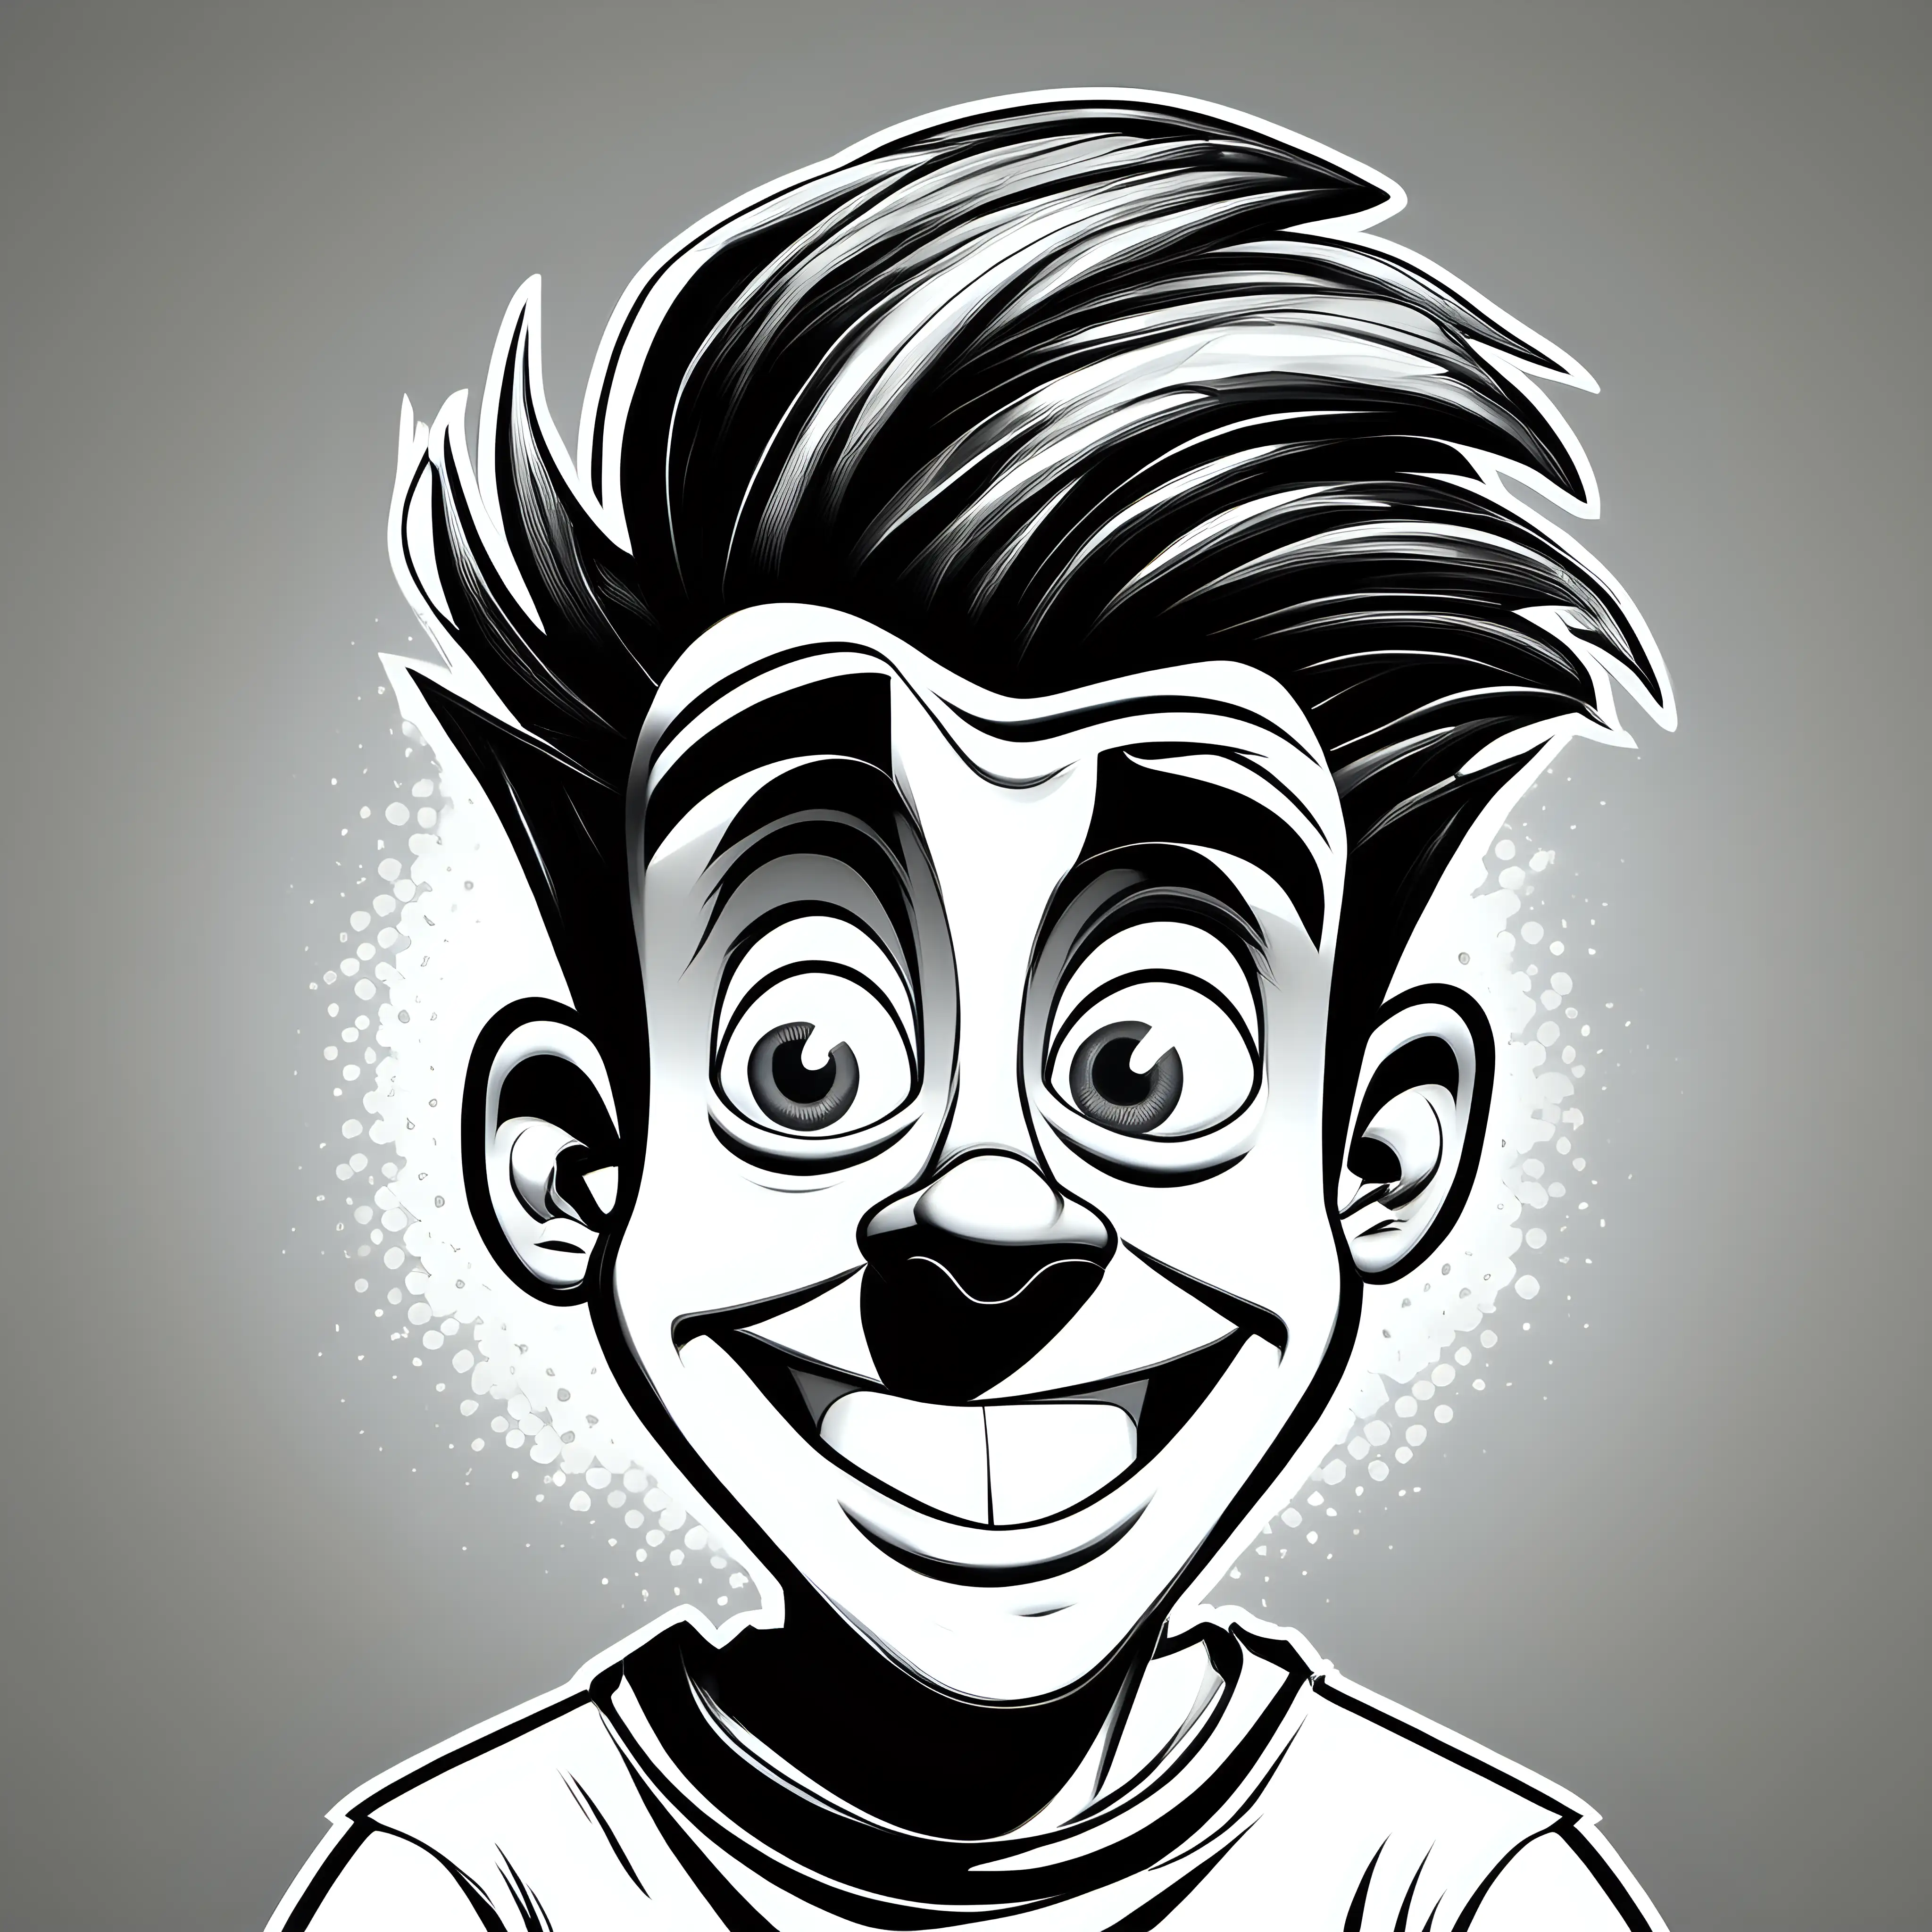 Young Man in the style of iconic pop culture caricatures, silly face, head, b&w, cartoon 